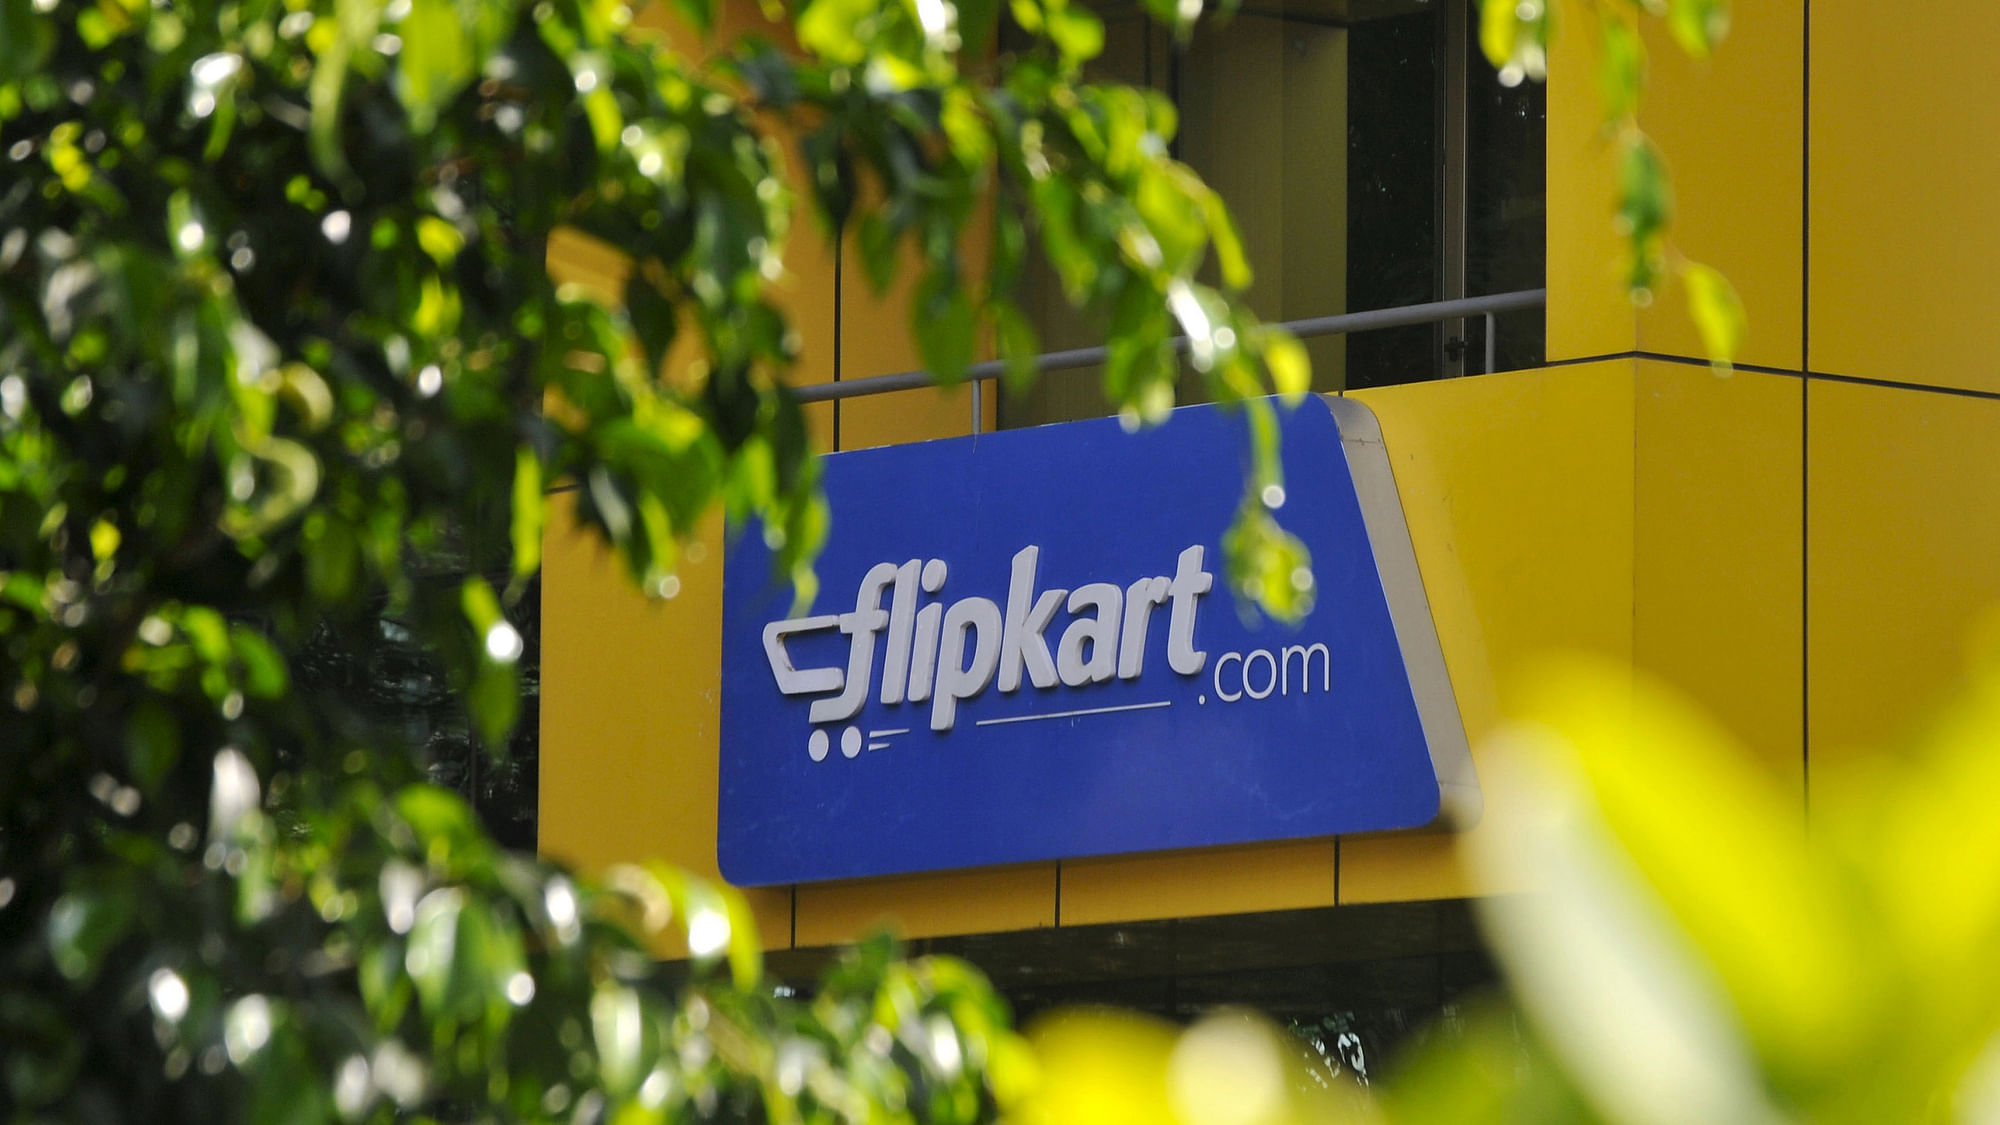 

The logo of India’s largest online marketplace Flipkart is seen on a building. (Photo: Reuters)